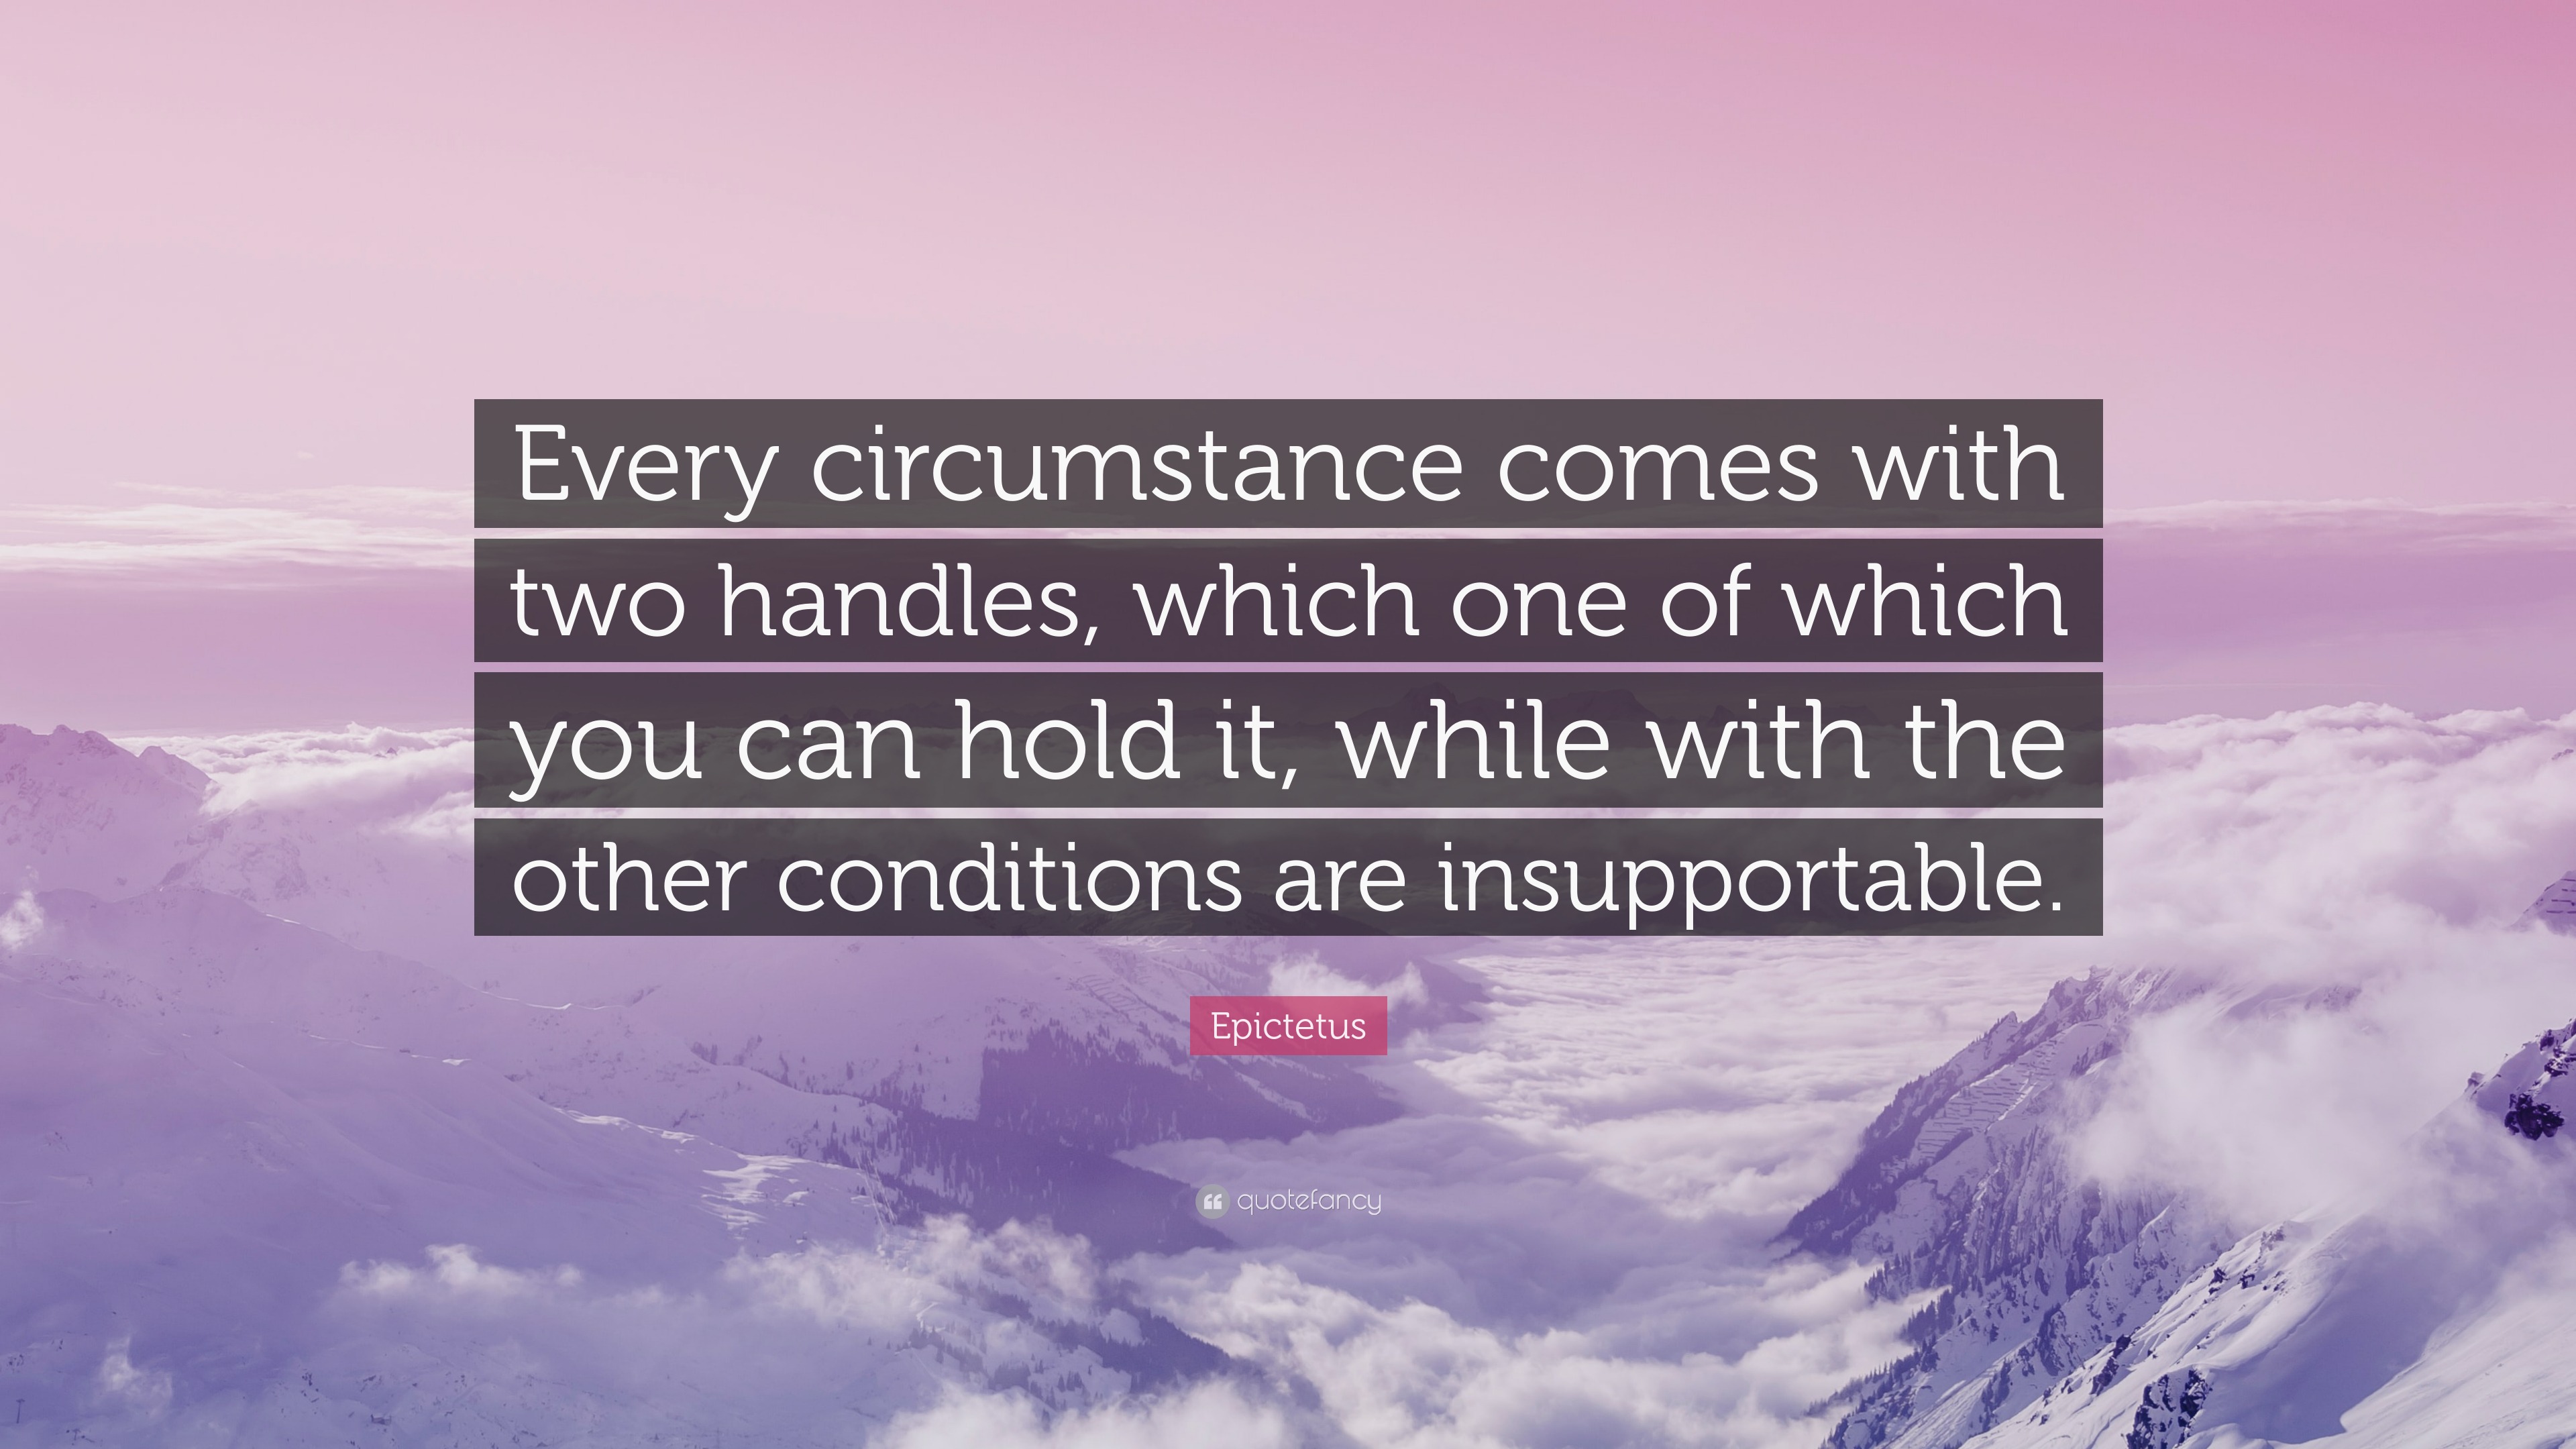 Epictetus Quote: “Every circumstance comes with two handles, which